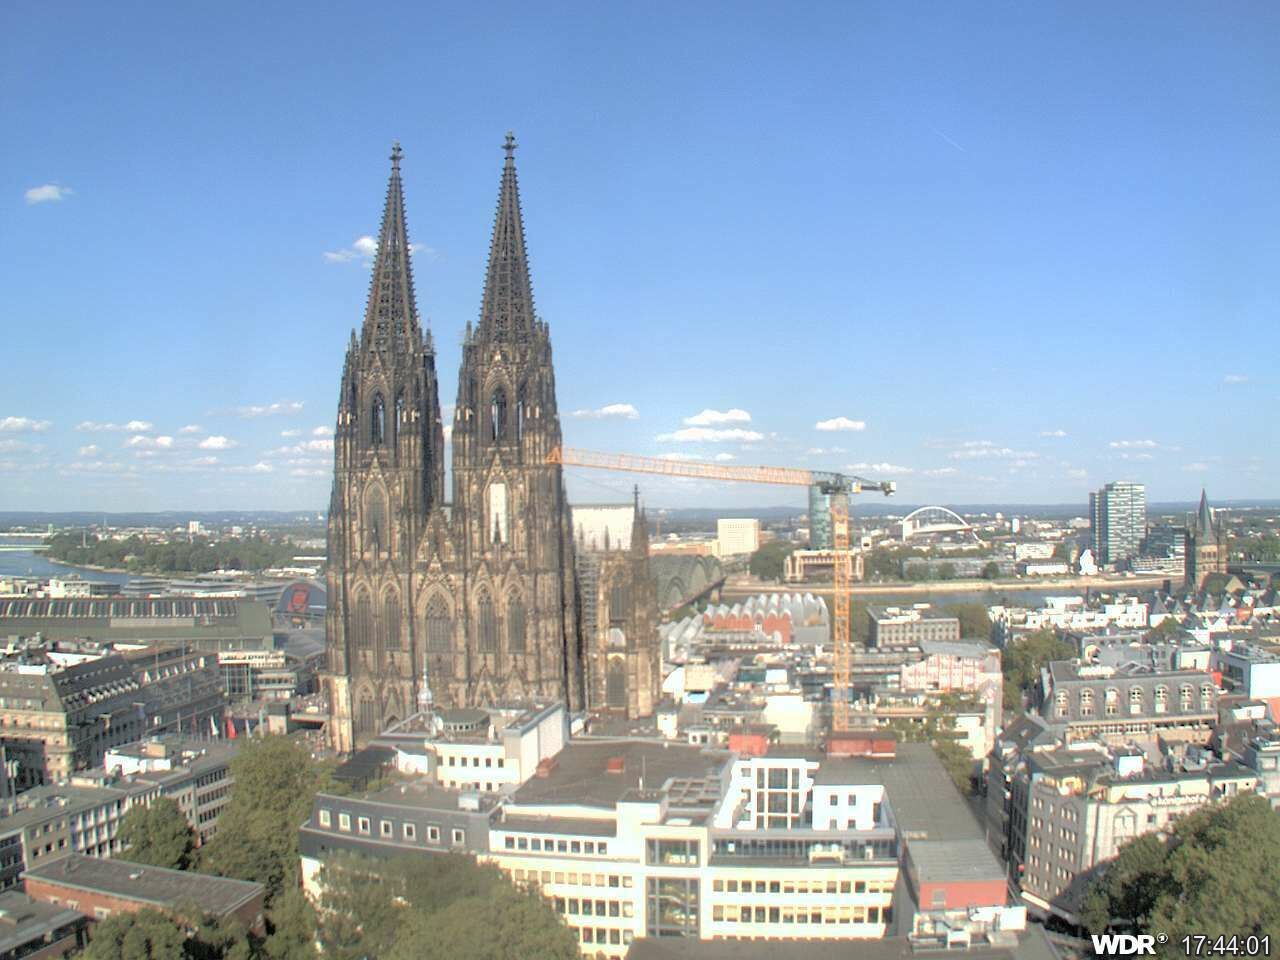 Cologne Wed. 17:45